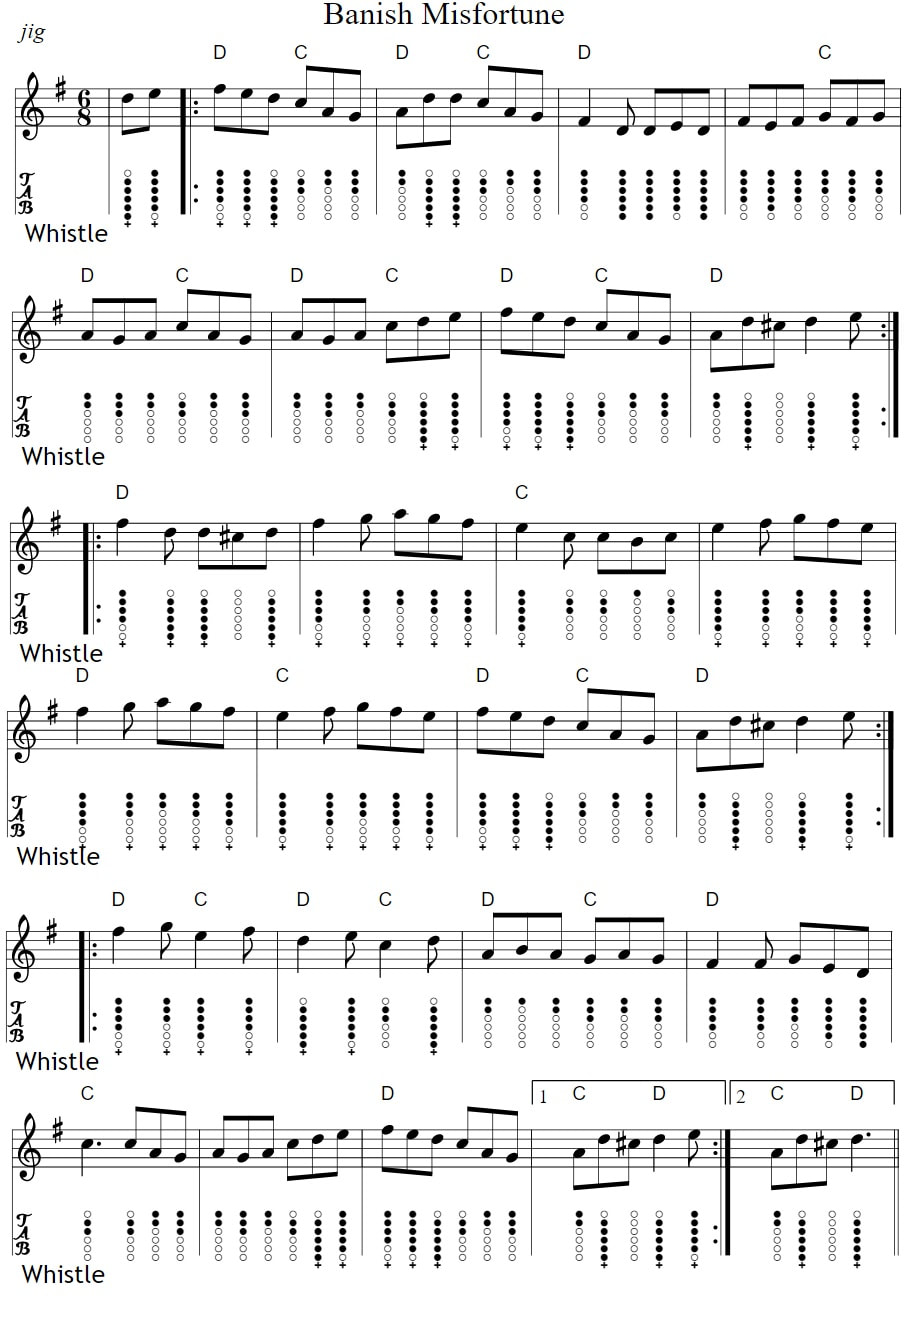 Banish misfortune sheet music tin whistle notes and chords